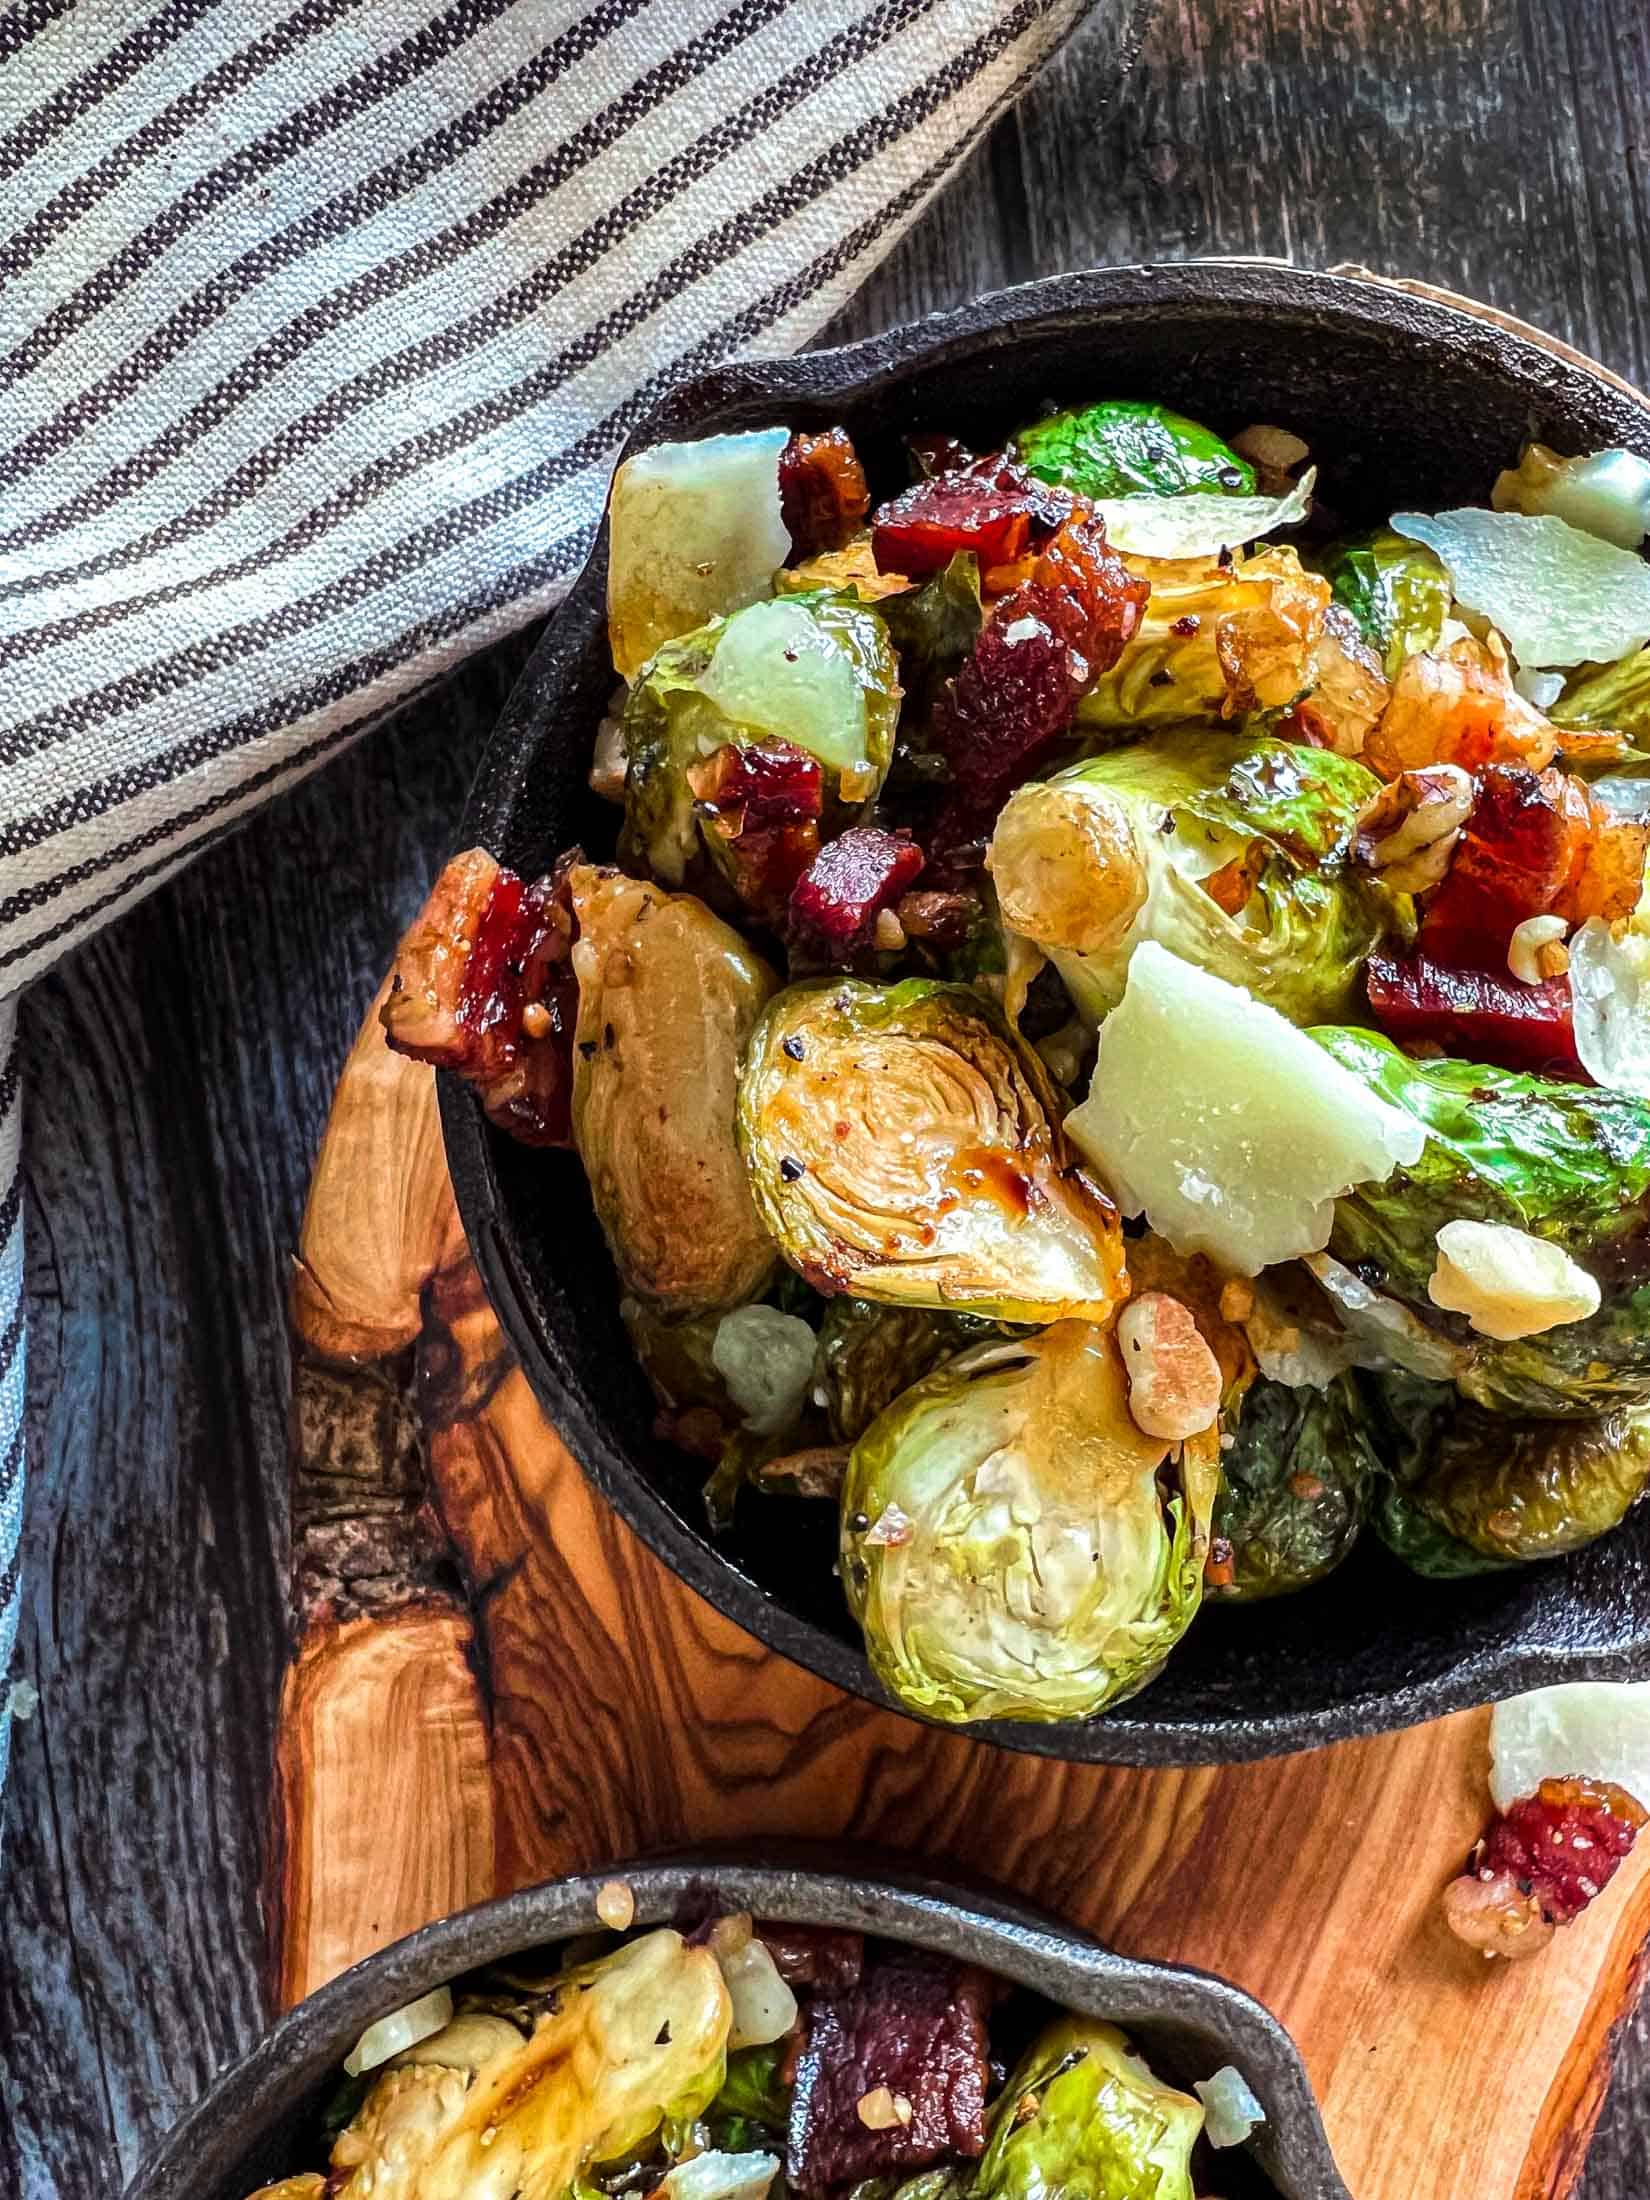 Smoked brussel sprouts with bacon, onions, and glaze in mini cast iron skillets on a wooden cutting board.